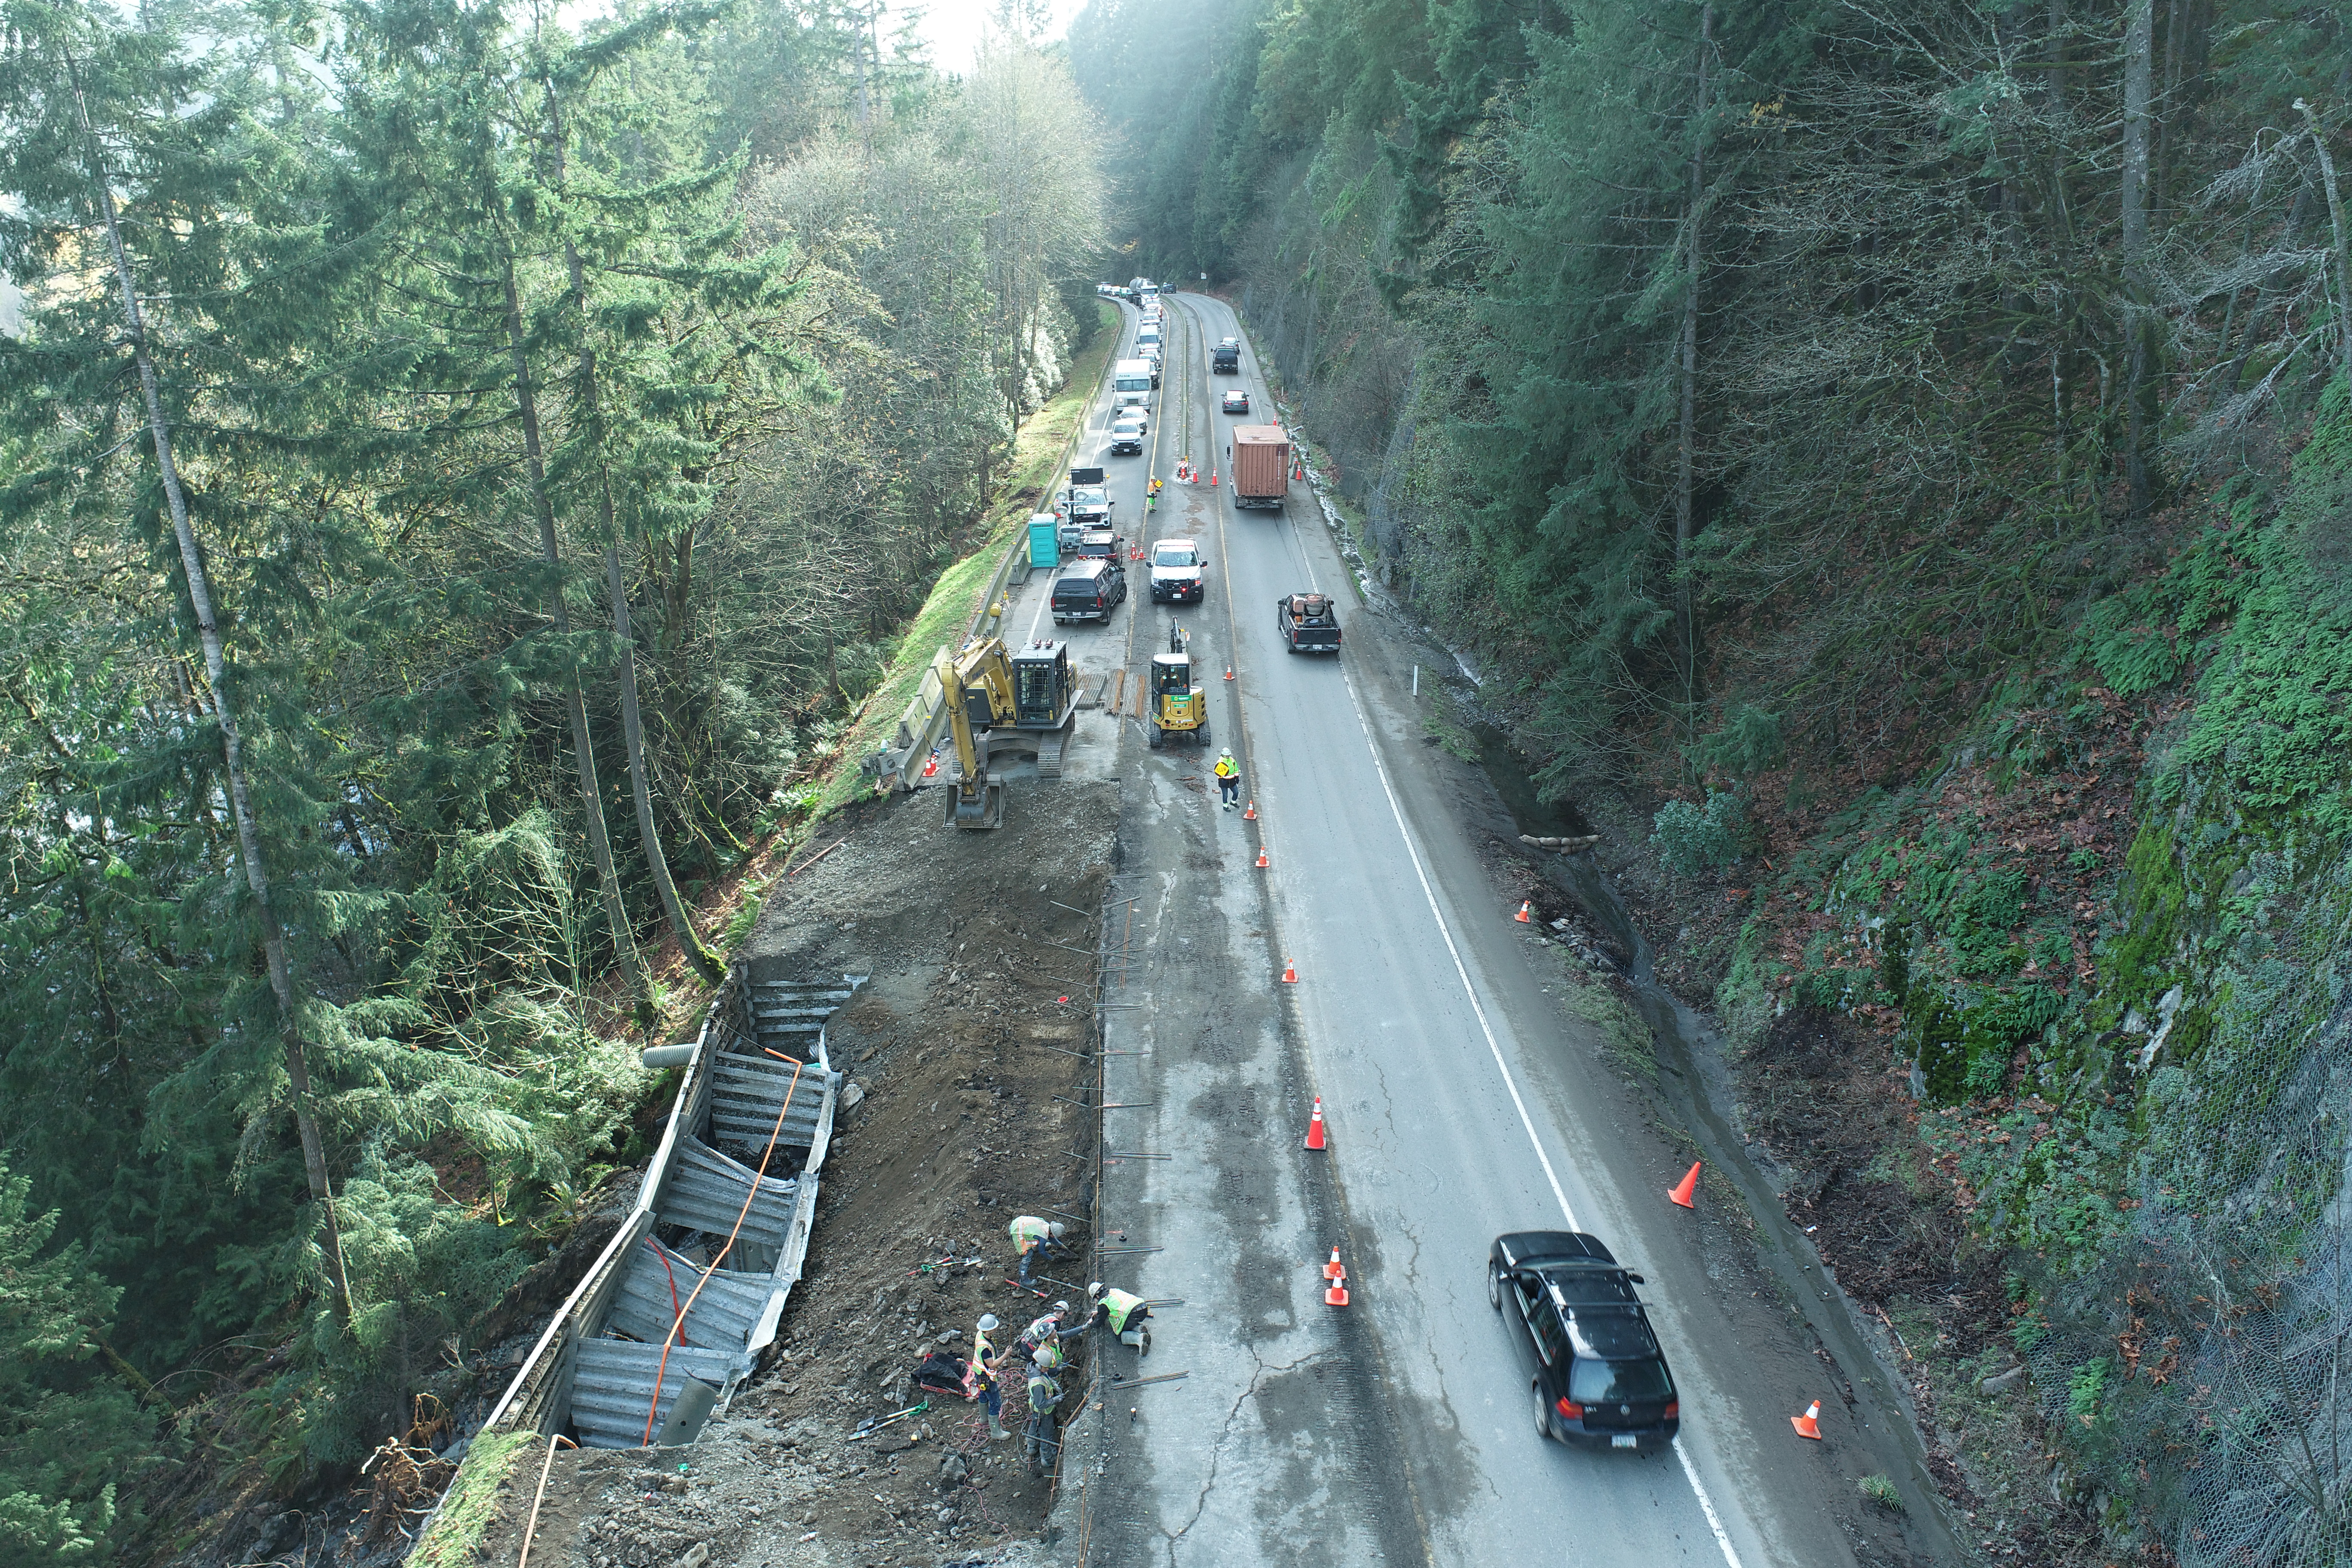 Workers inspect a washed out lane of Trans Canada Highway 1 after devastating rain storms caused flooding and landslides, in Malahat, British Columbia, Canada November 17, 2021. Picture taken November 17, 2021. B.C. Ministry of Transportation and Infrastructure/Handout via REUTERS.  NO RESALES. NO ARCHIVES. THIS IMAGE HAS BEEN SUPPLIED BY A THIRD PARTY.